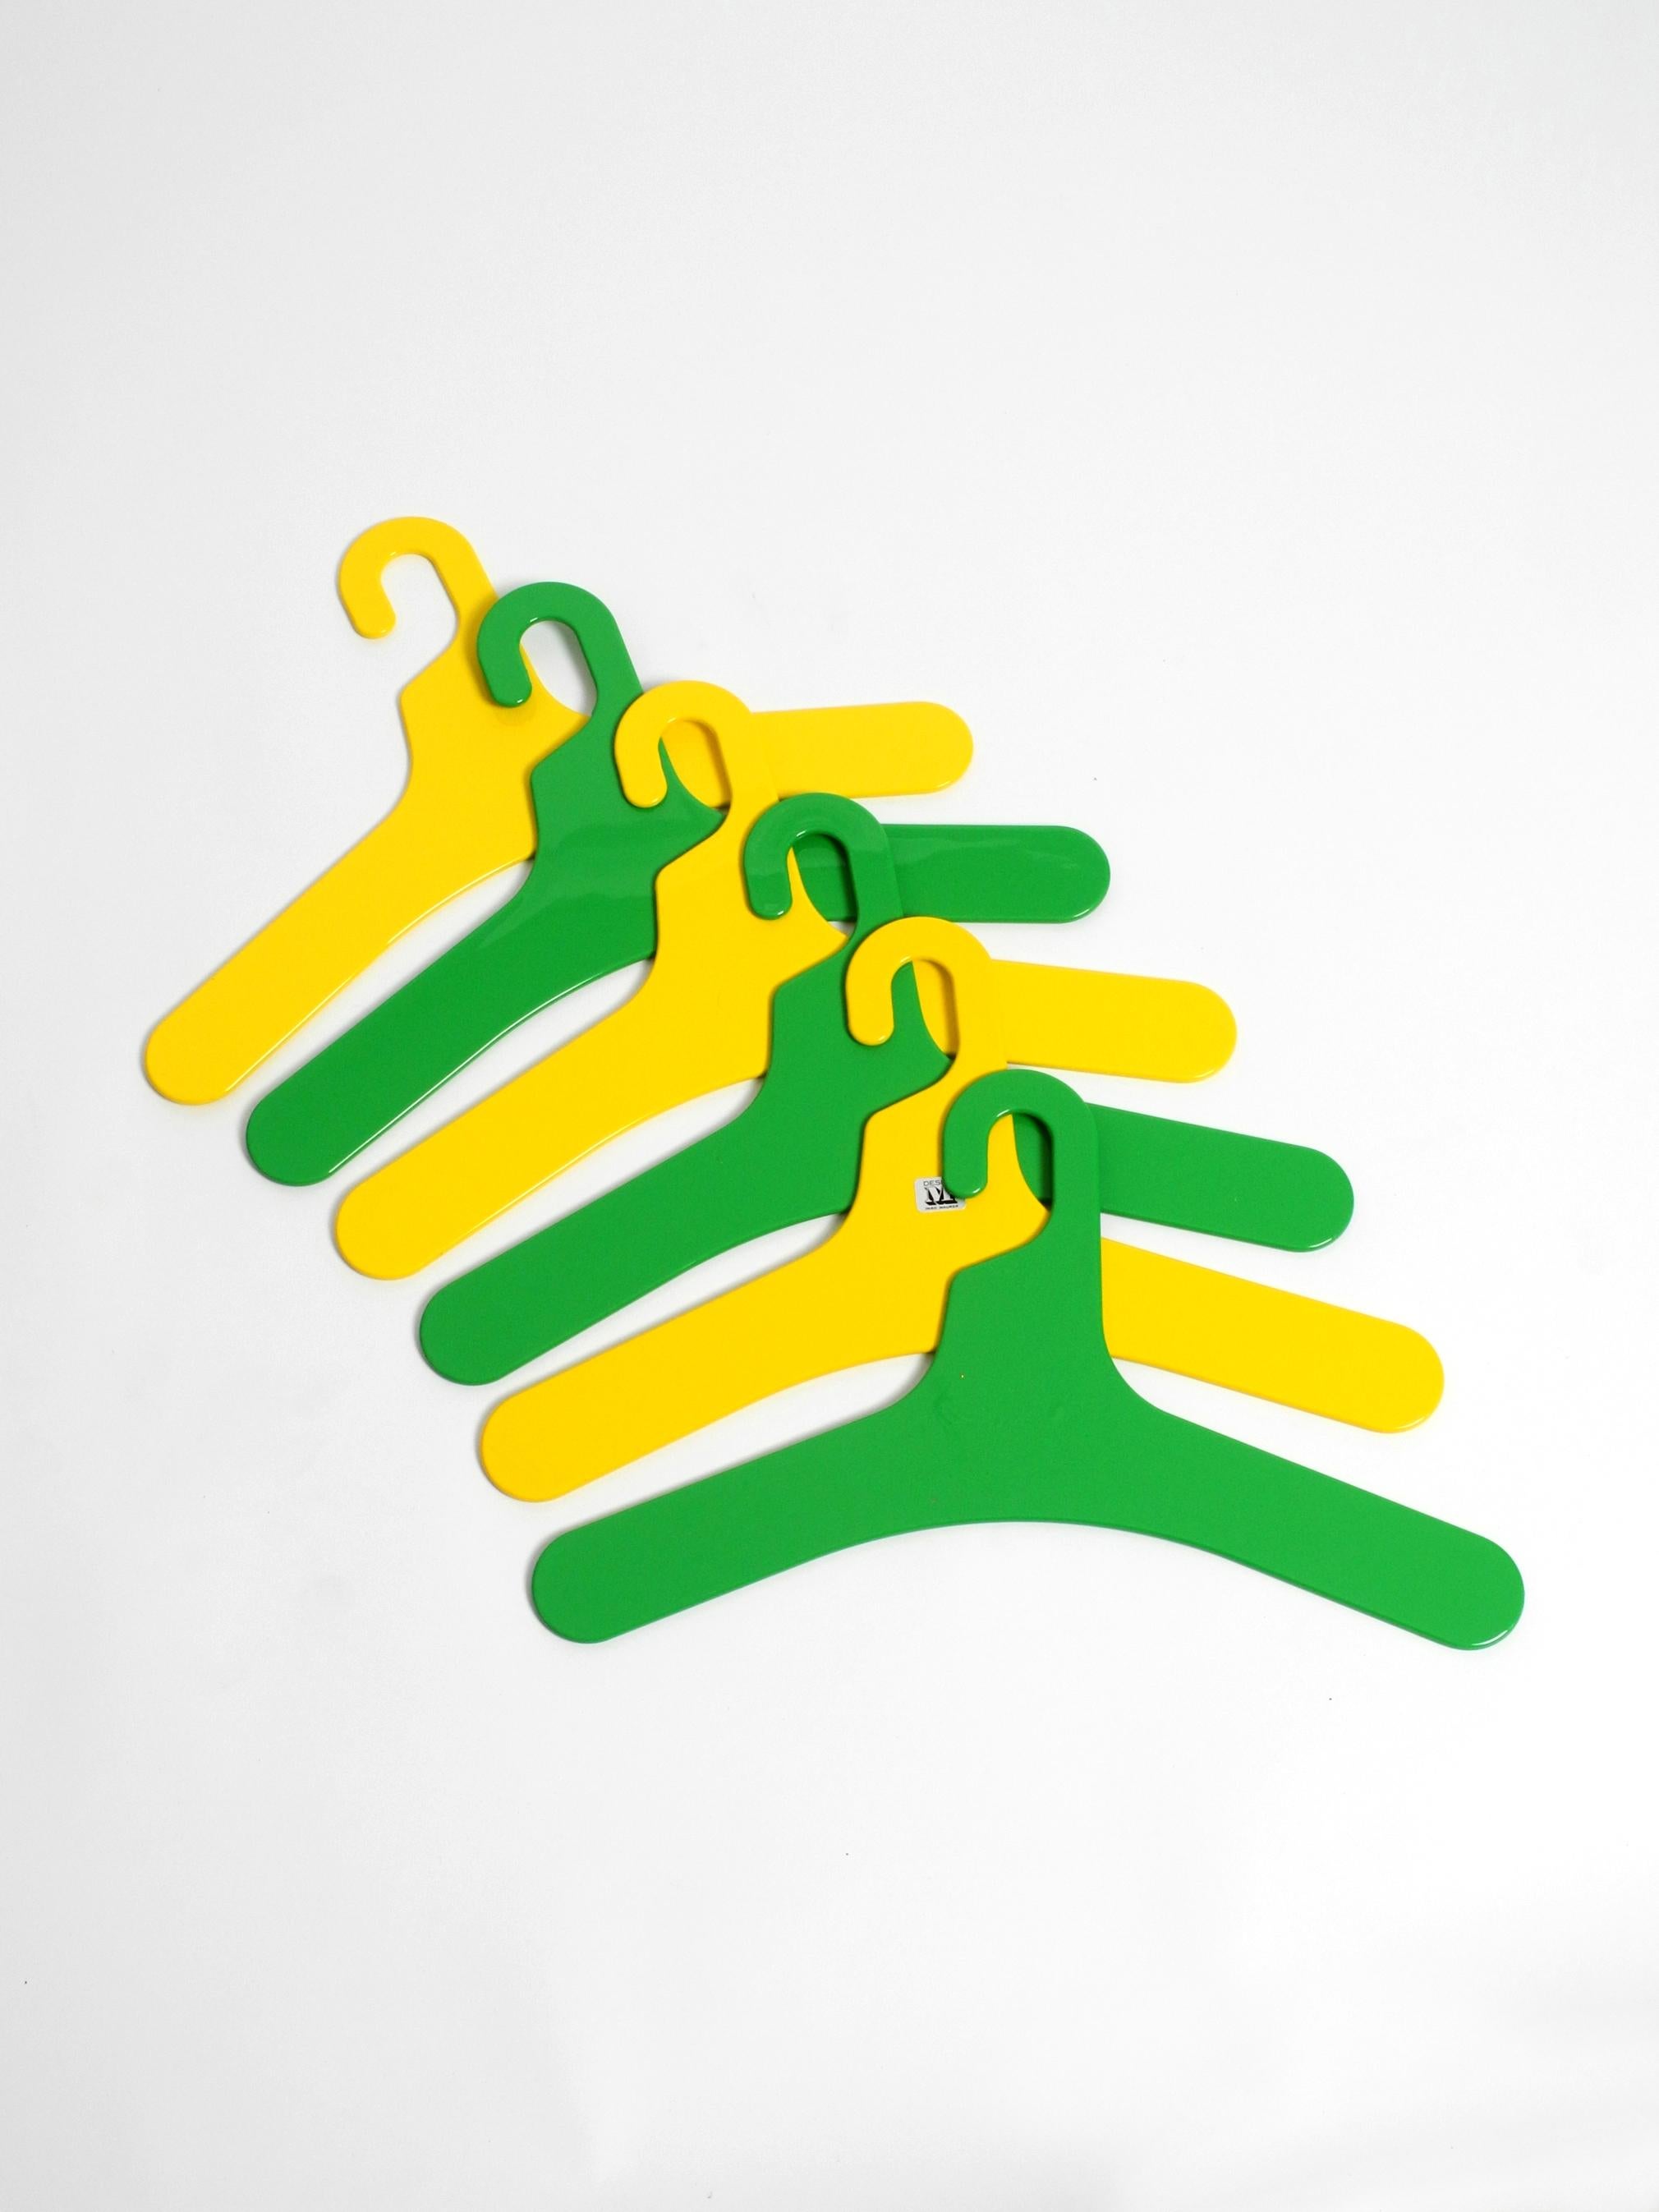 6 original unused 1970s 3 yellow and 3 green plastic hangers by Ingo Maurer for Design M.
In the typical 70s Pop Art colors yellow and green.
Still in the original plastic wrap. Only unpacked to take photos.
Some still have the original manufacturer